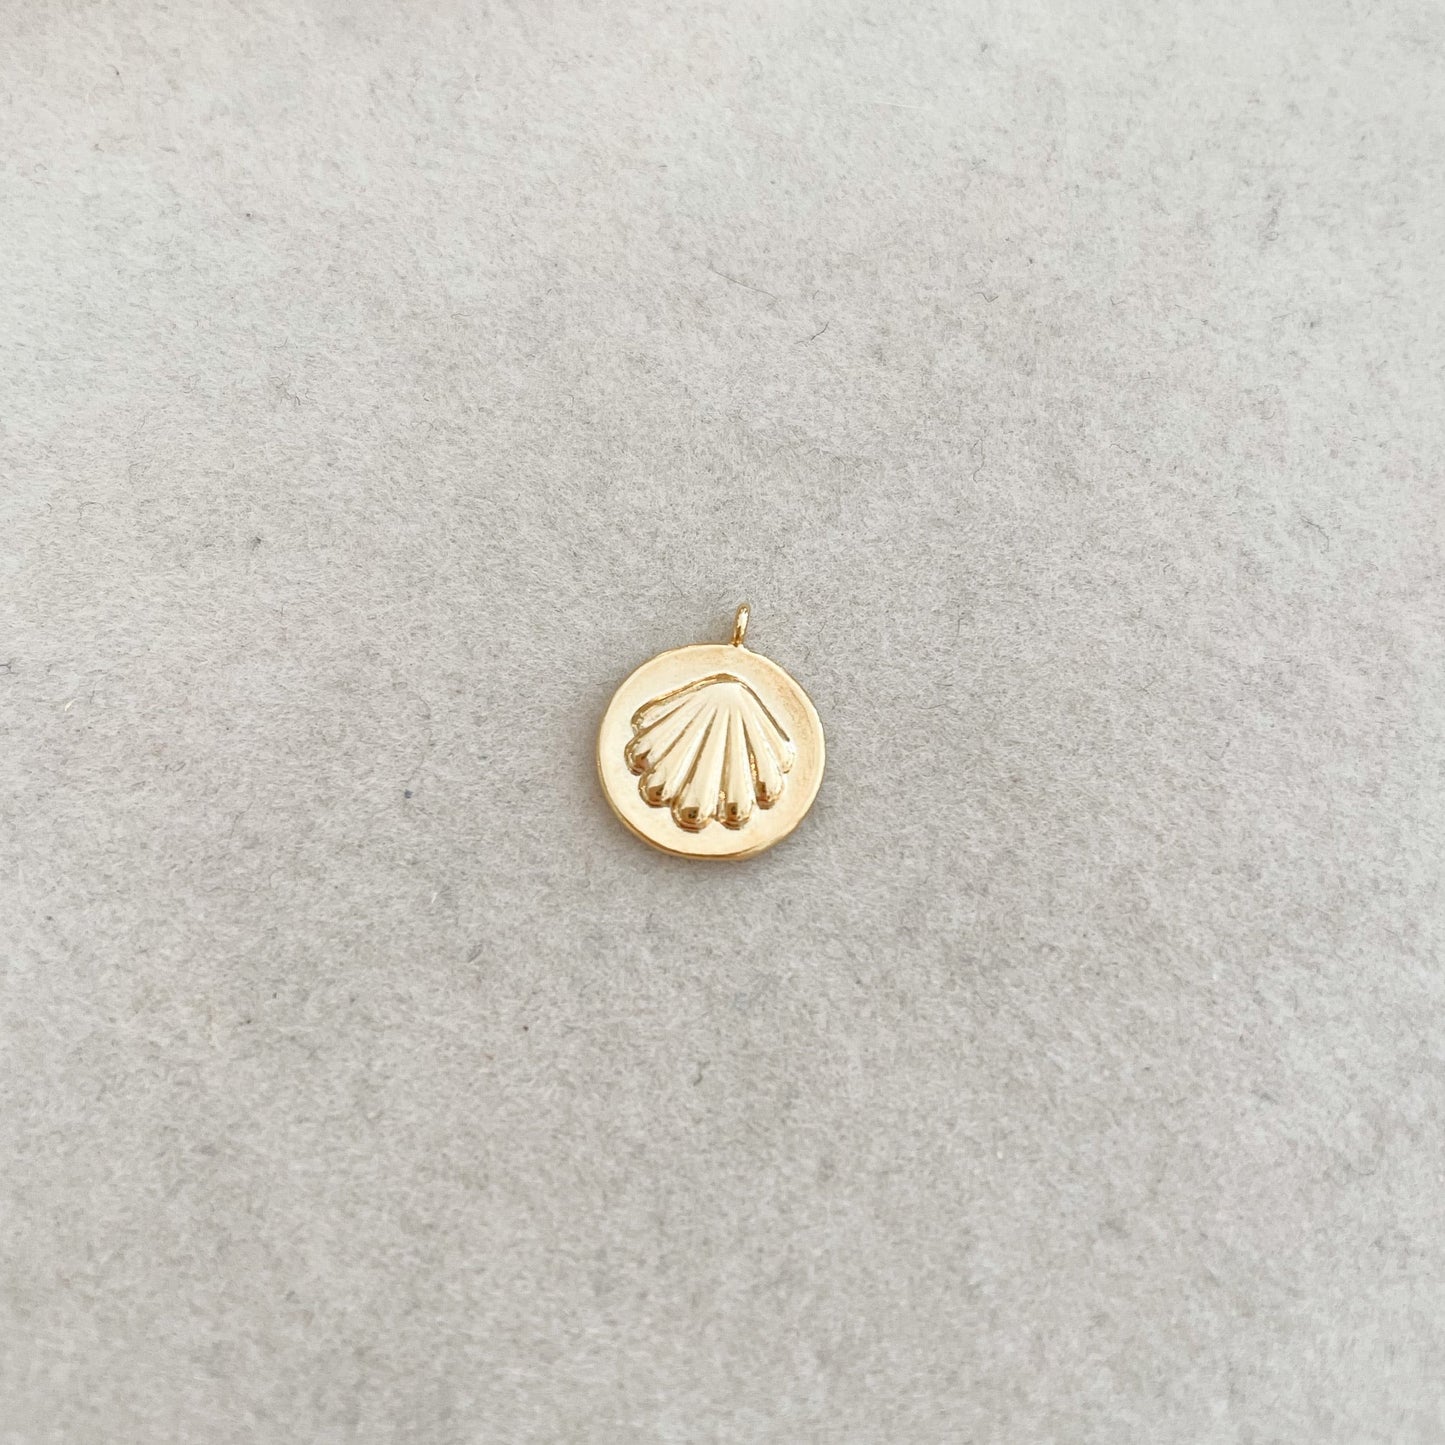 SEASHELL STAMPED COIN CHARM